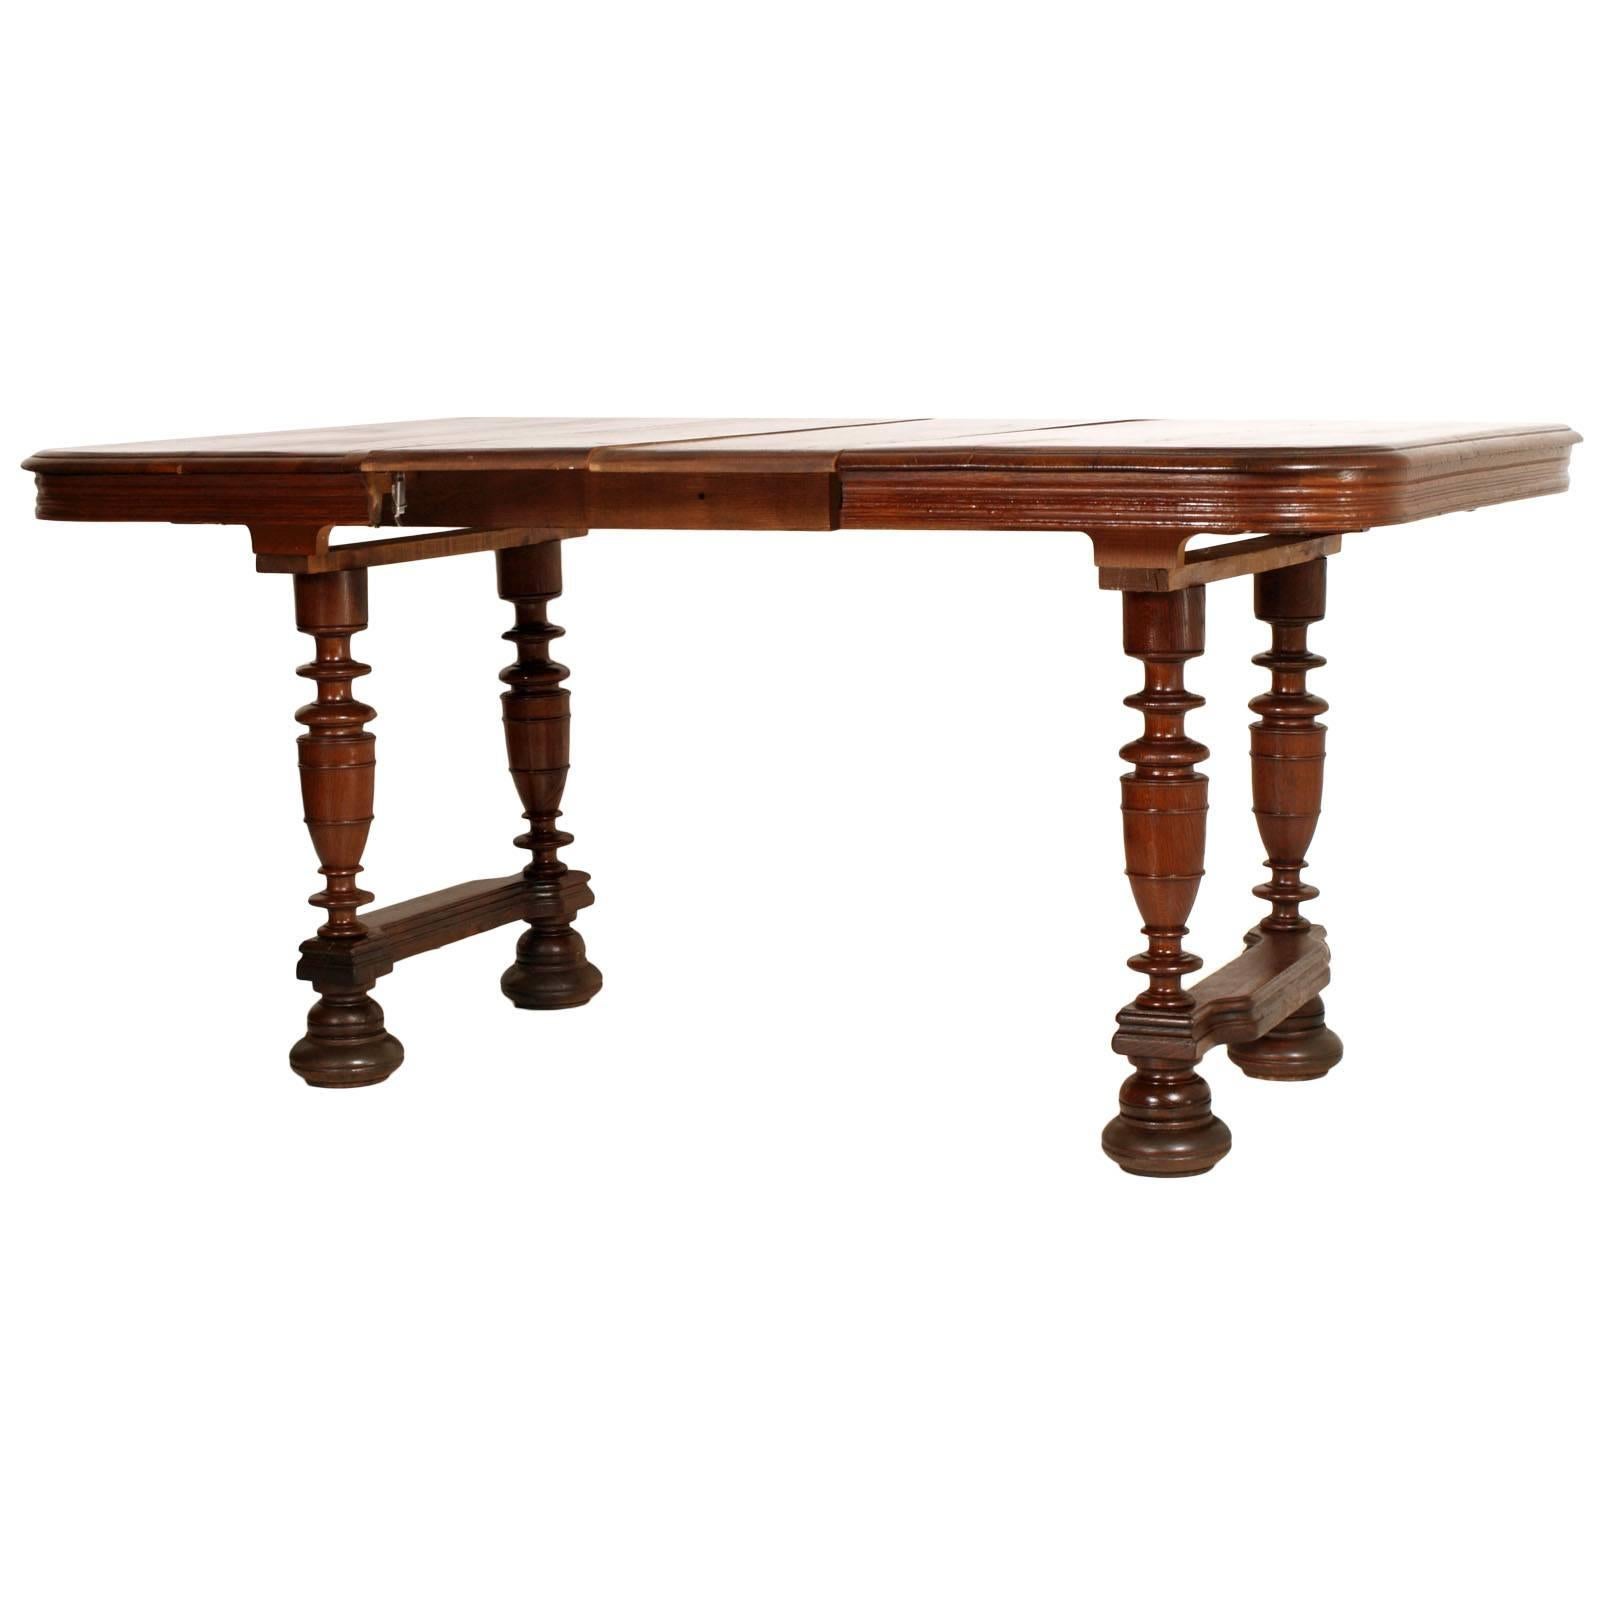 19th Century France Provencal Extendable Table Solid Oak, Restored, Wax-Polished In Good Condition For Sale In Vigonza, Padua